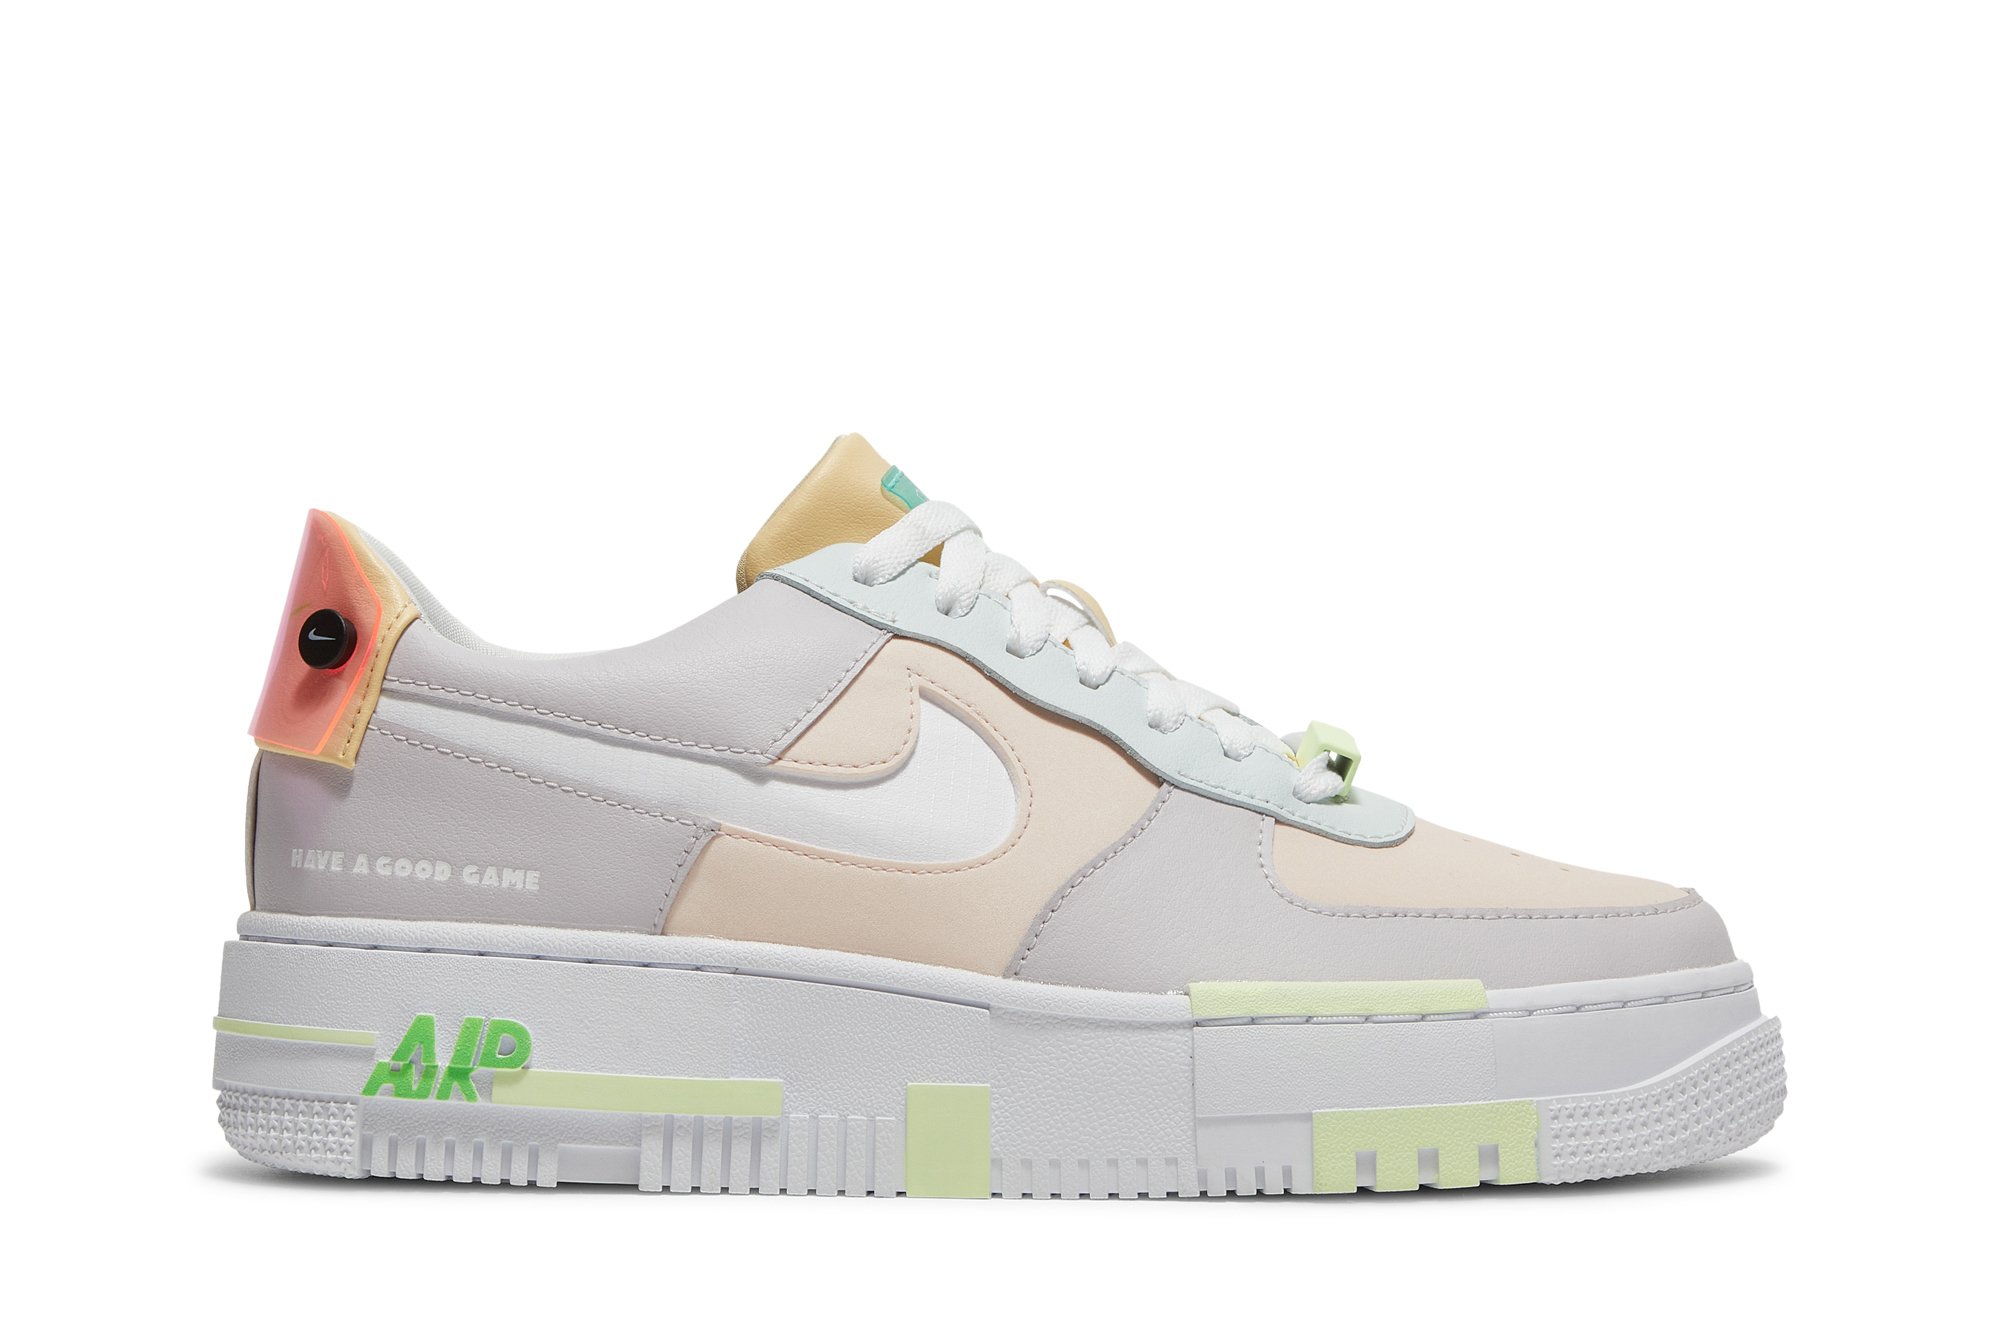 Buy Wmns Air Force 1 Pixel 'Have A Good Game' - DO2330 511 - Pink